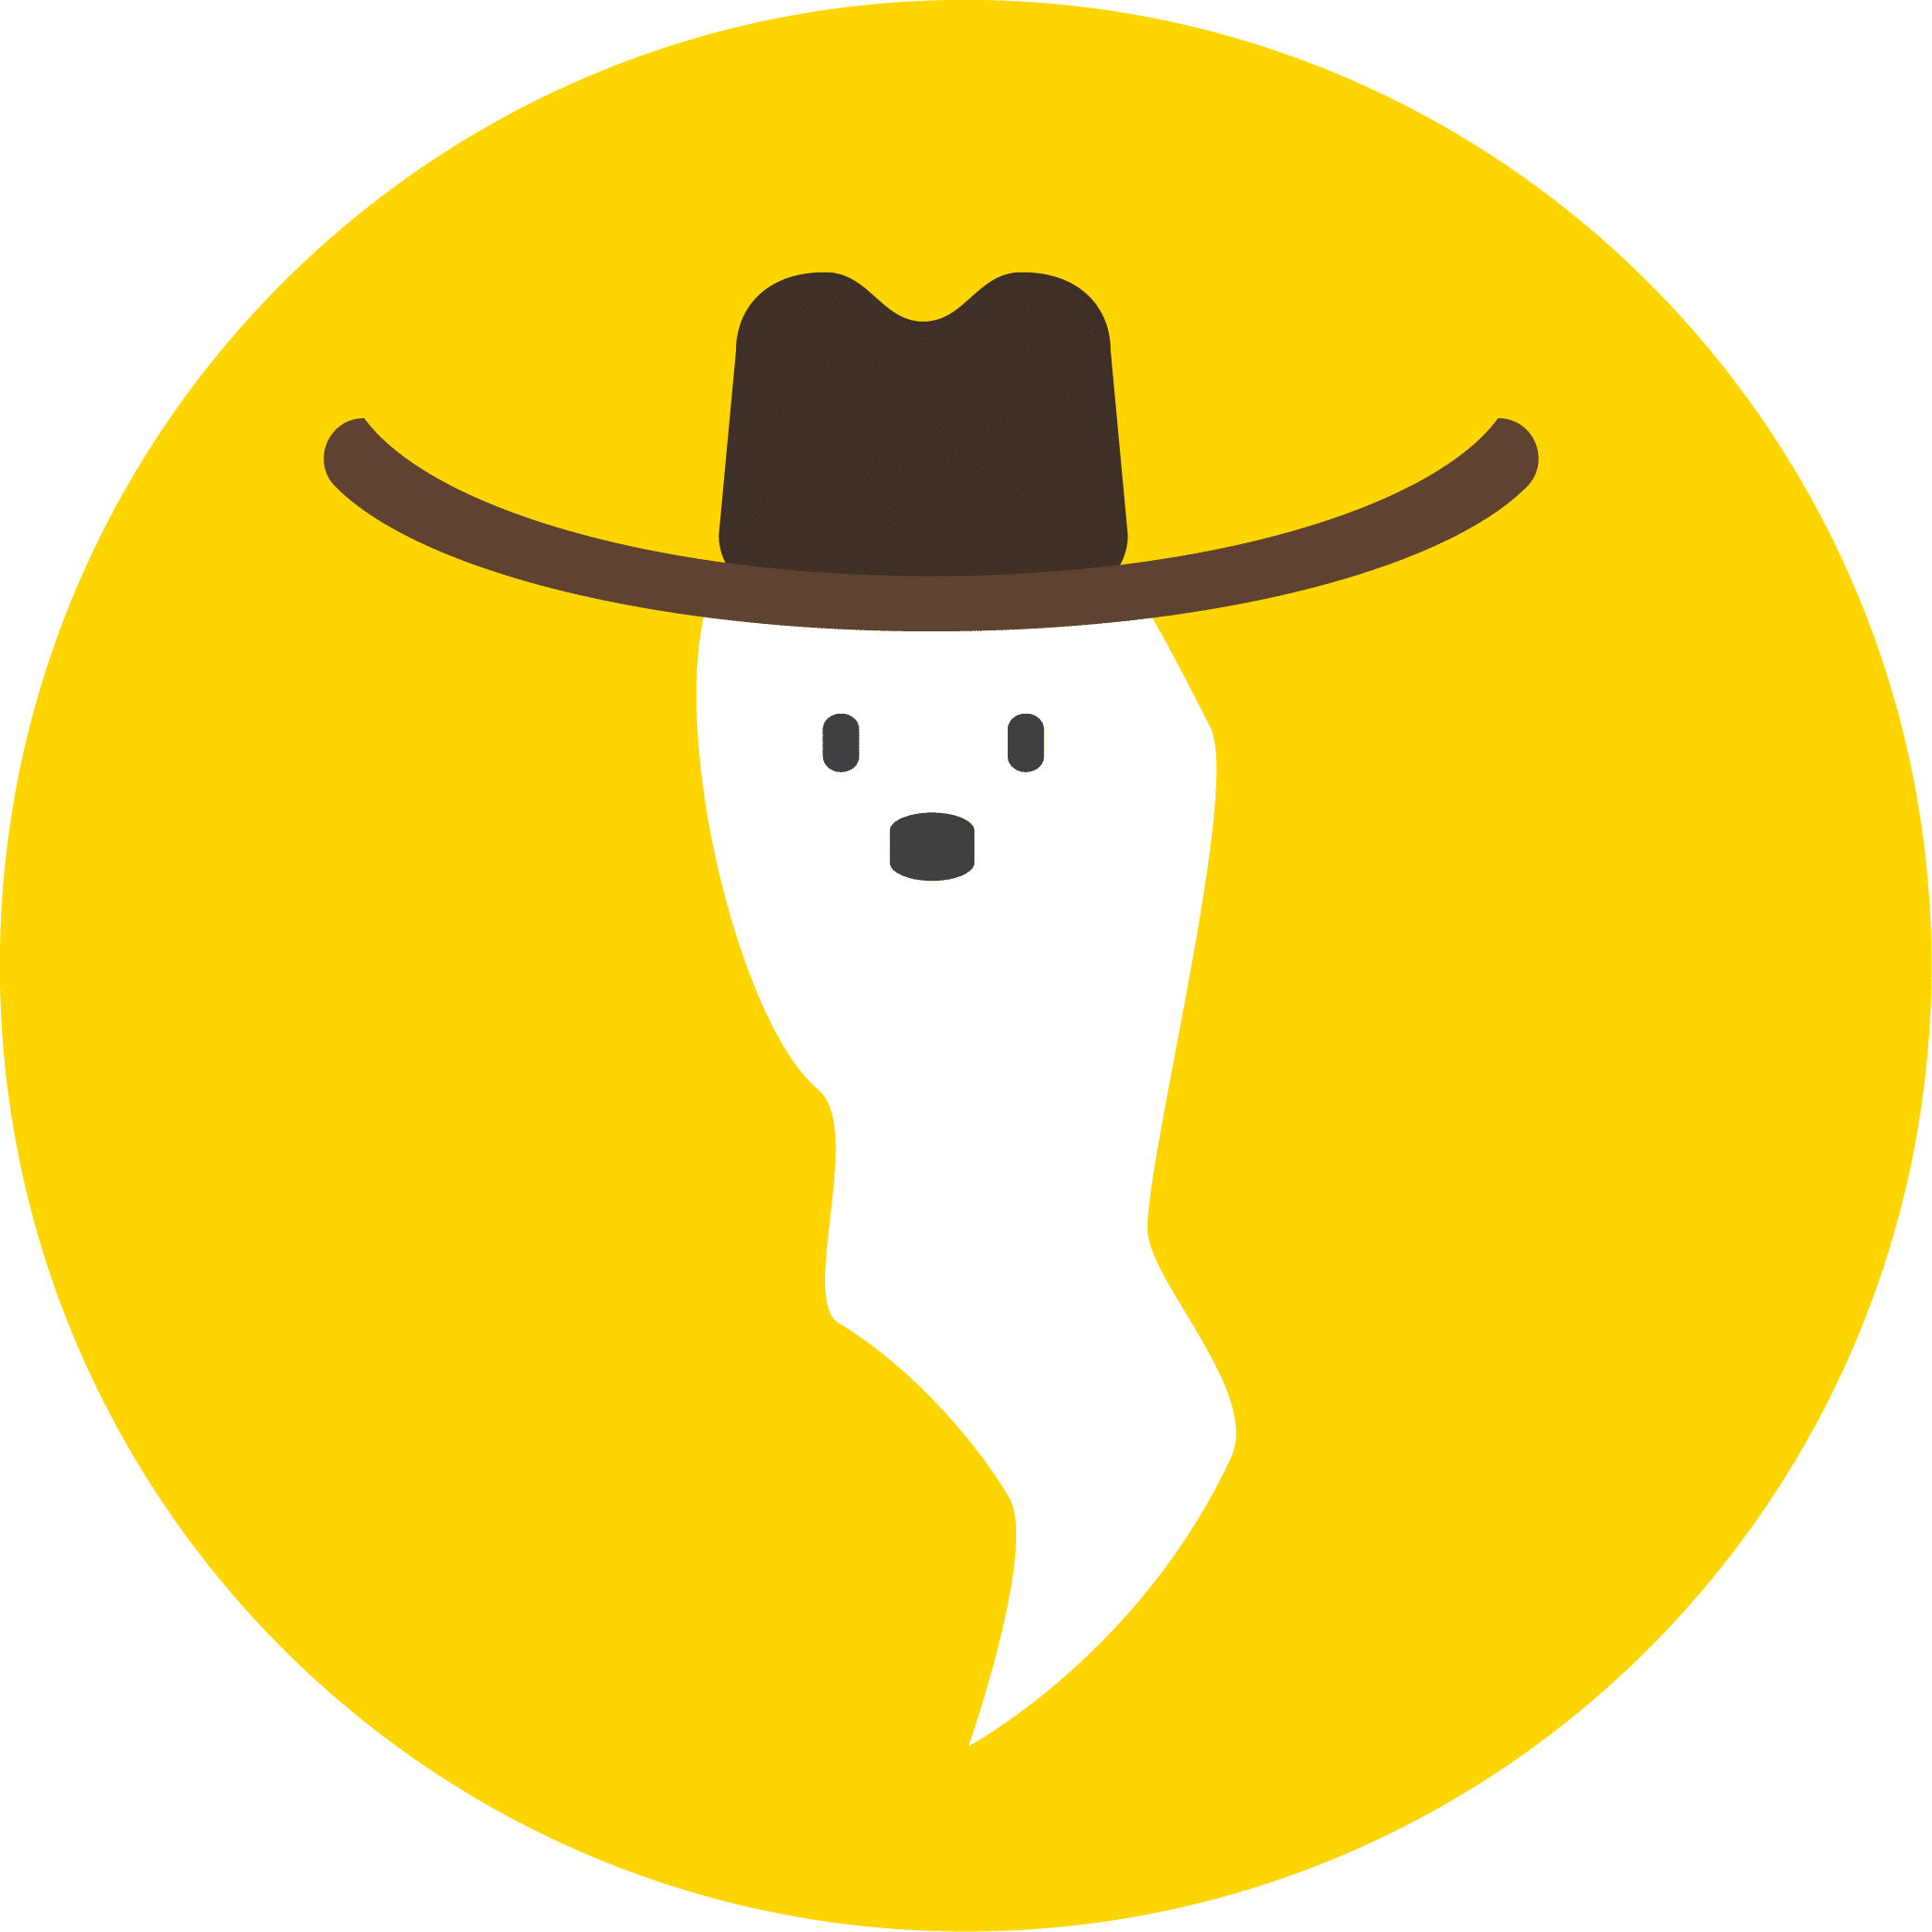 Illustration of a ghost wearing a cowboy hat.